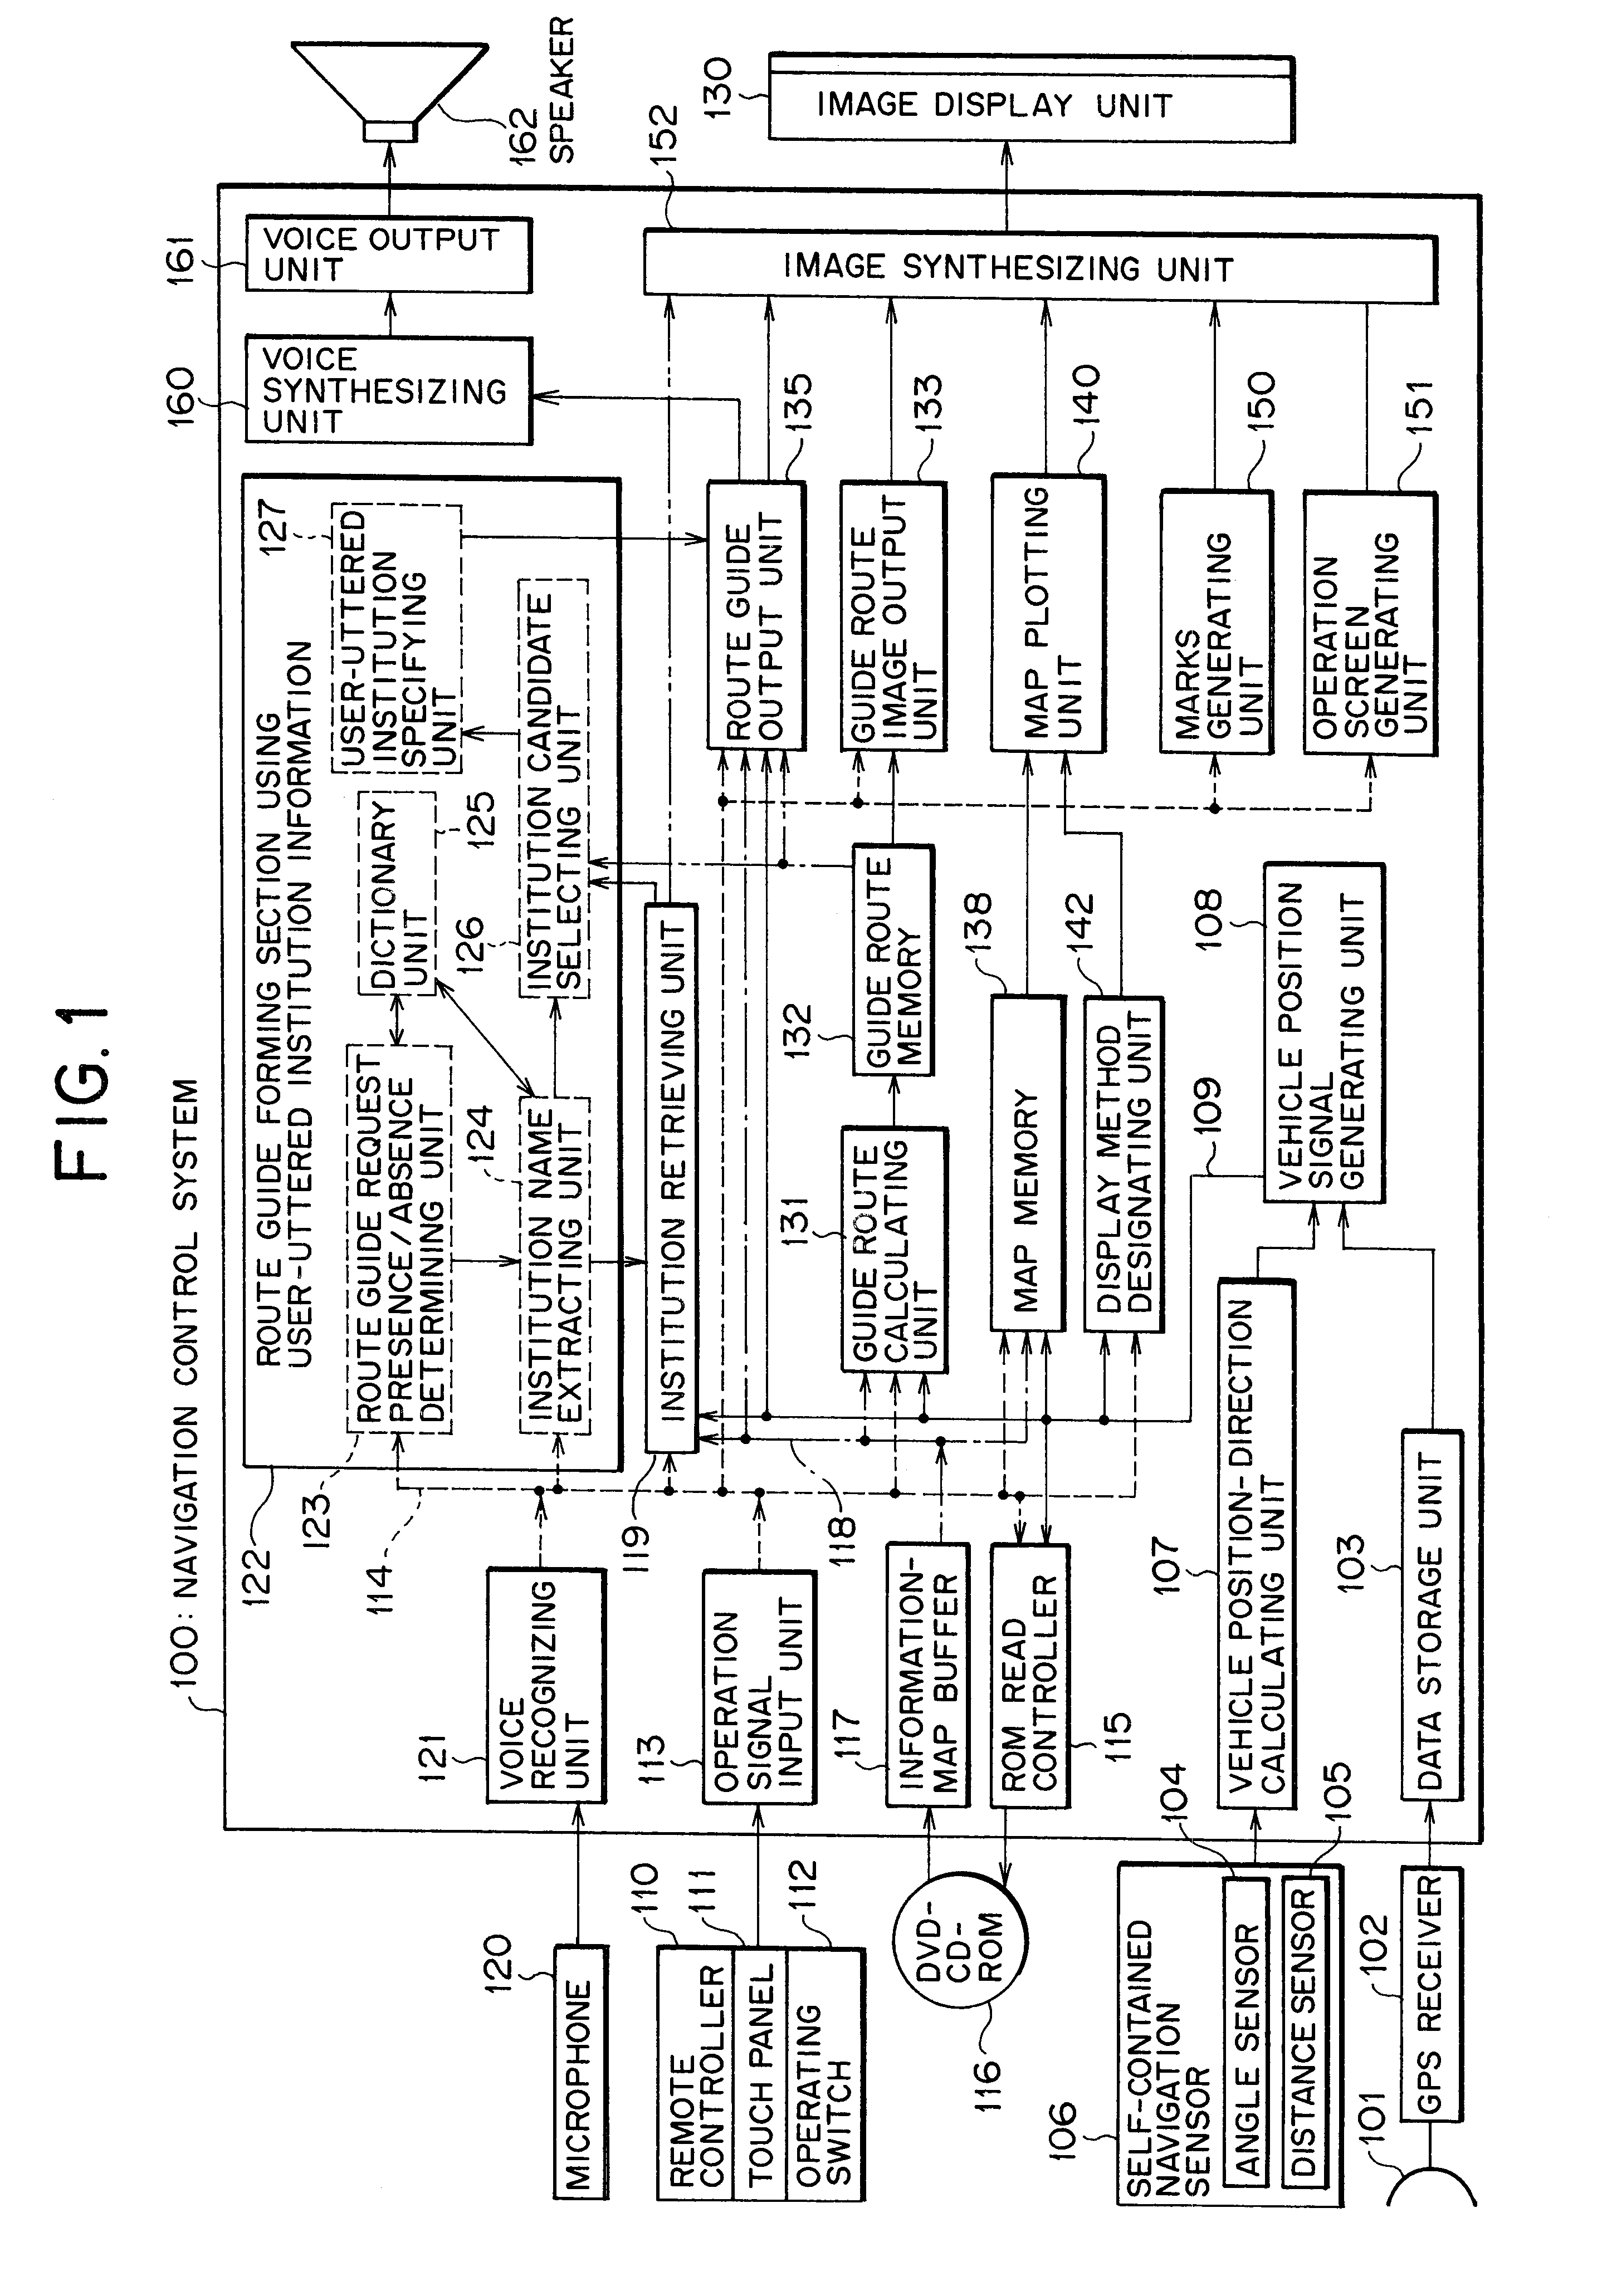 Method and system for route guiding